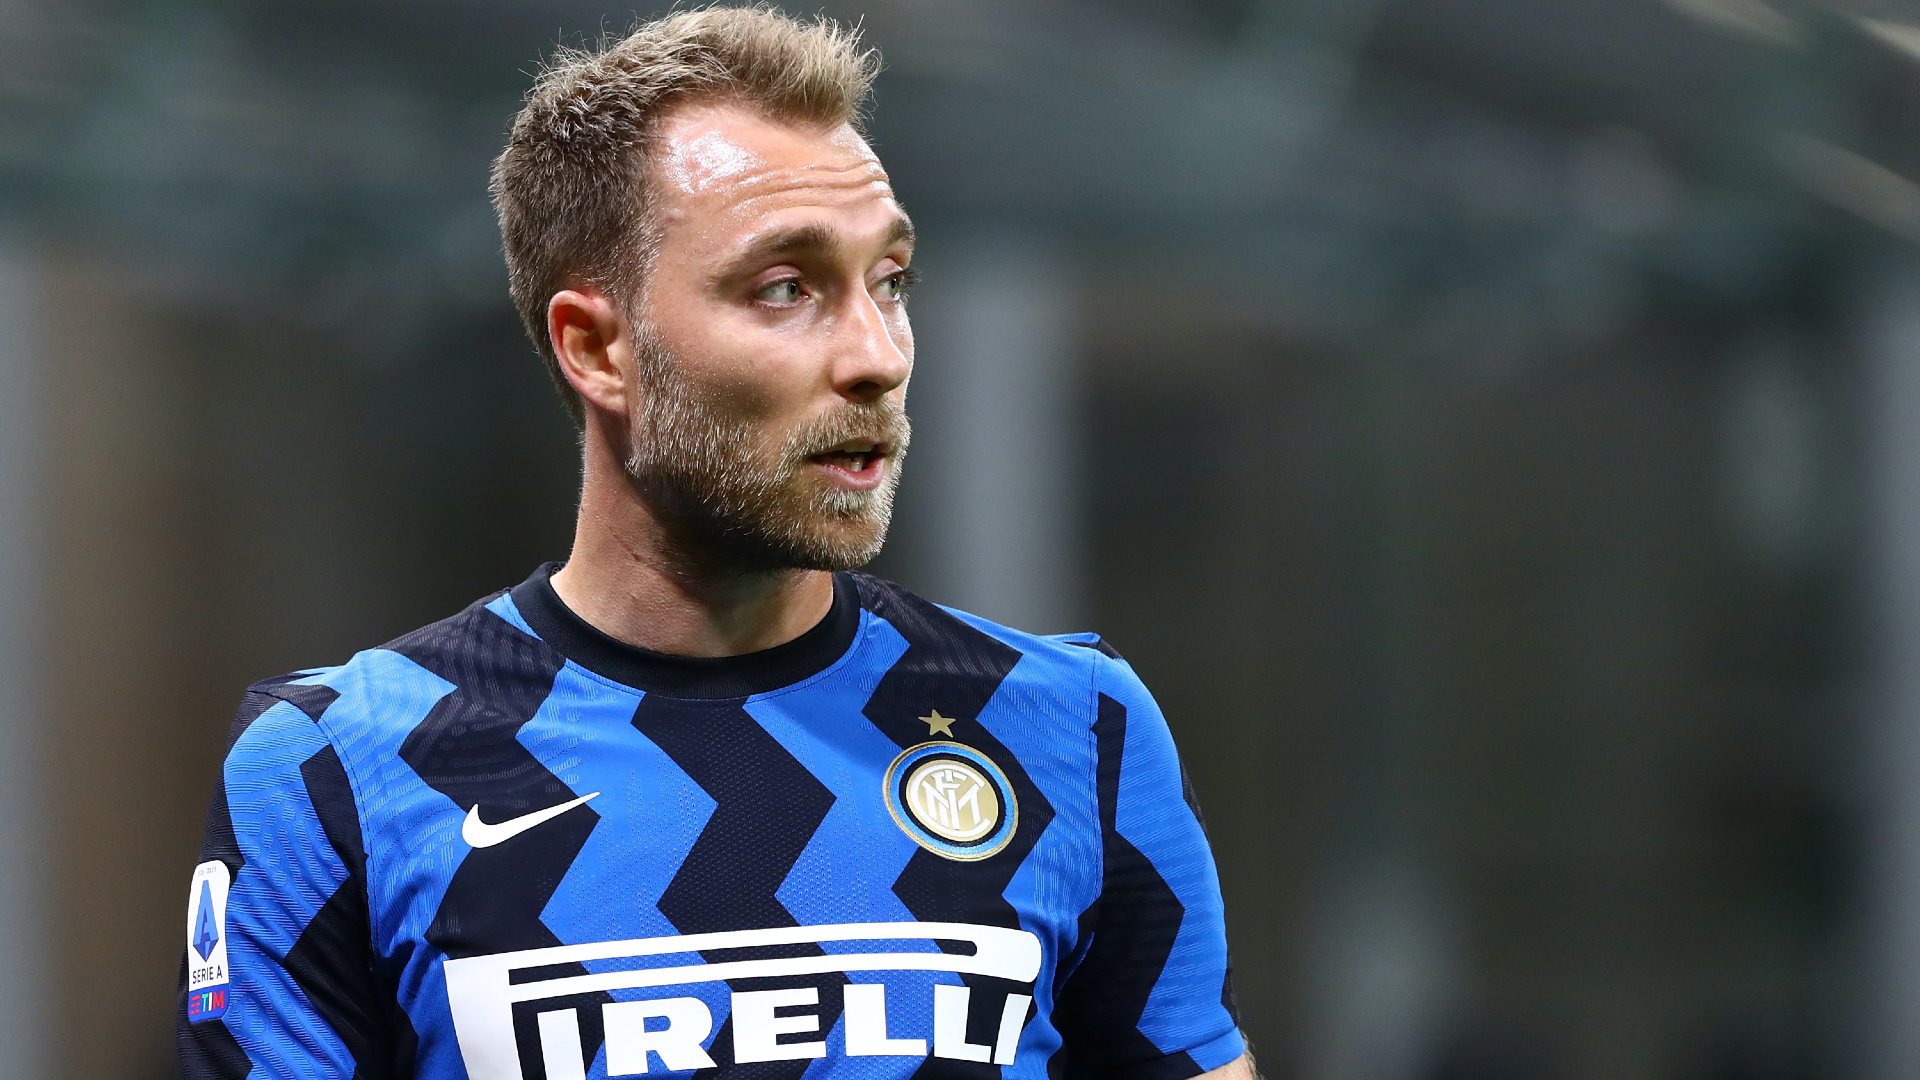 Eriksen can leave in January, Inter CEO Marotta confirms